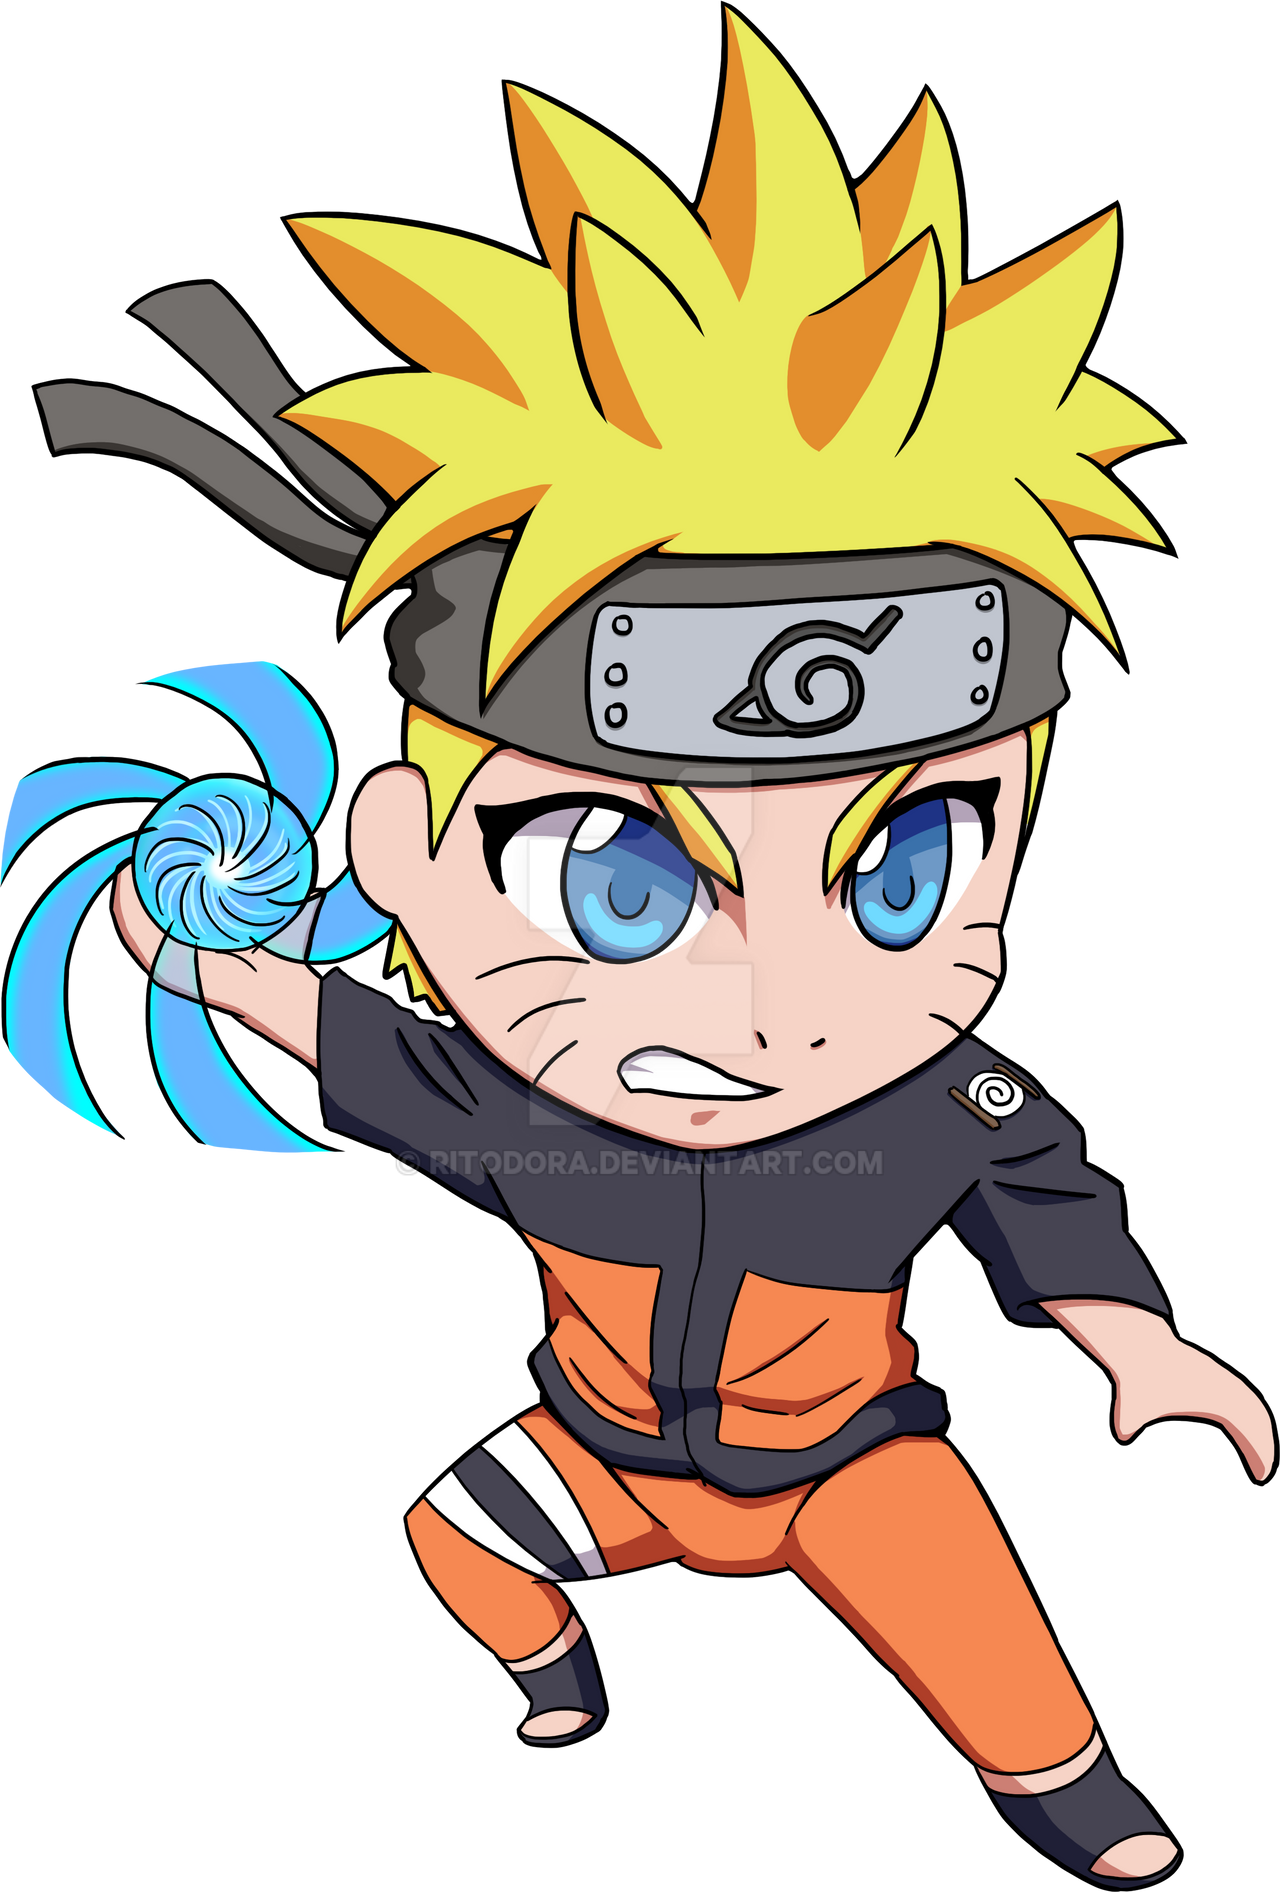 Cute Naruto stickers and other products design by Ritodora on DeviantArt